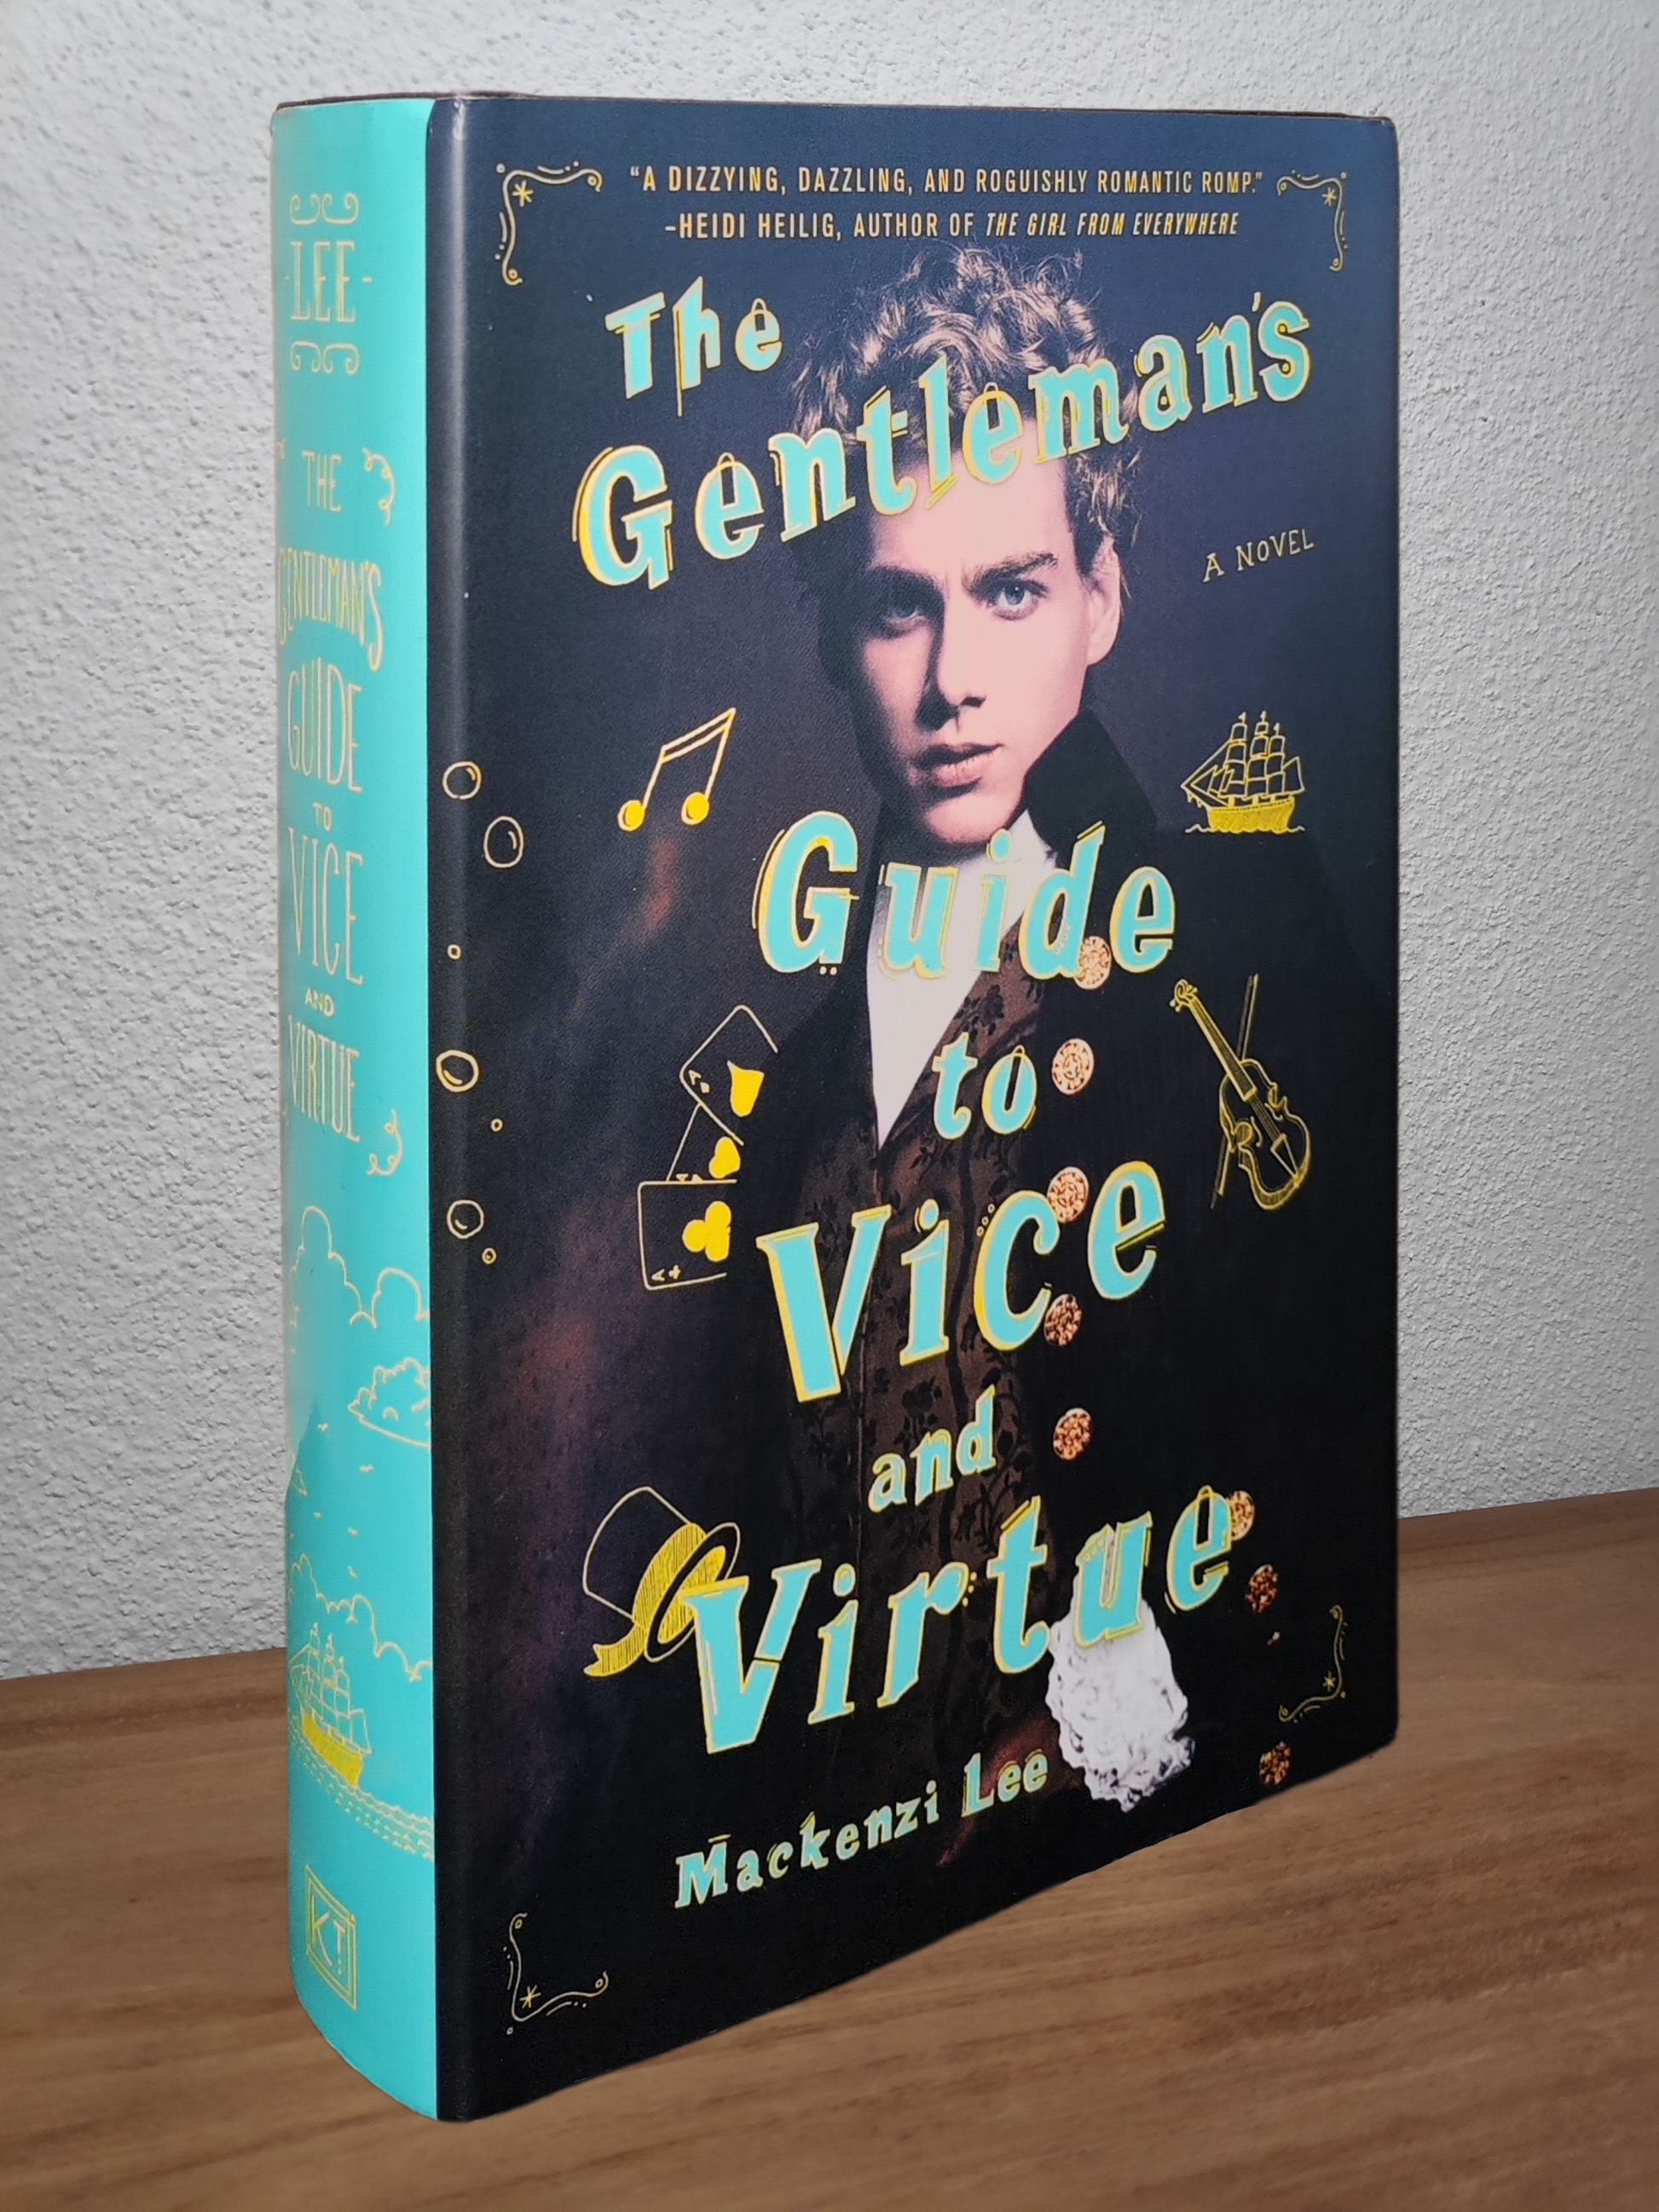 Mackenzi Lee - The Gentleman's Guide to Vice and Virtue  - Second-hand english book to deliver in Zurich & Switzerland